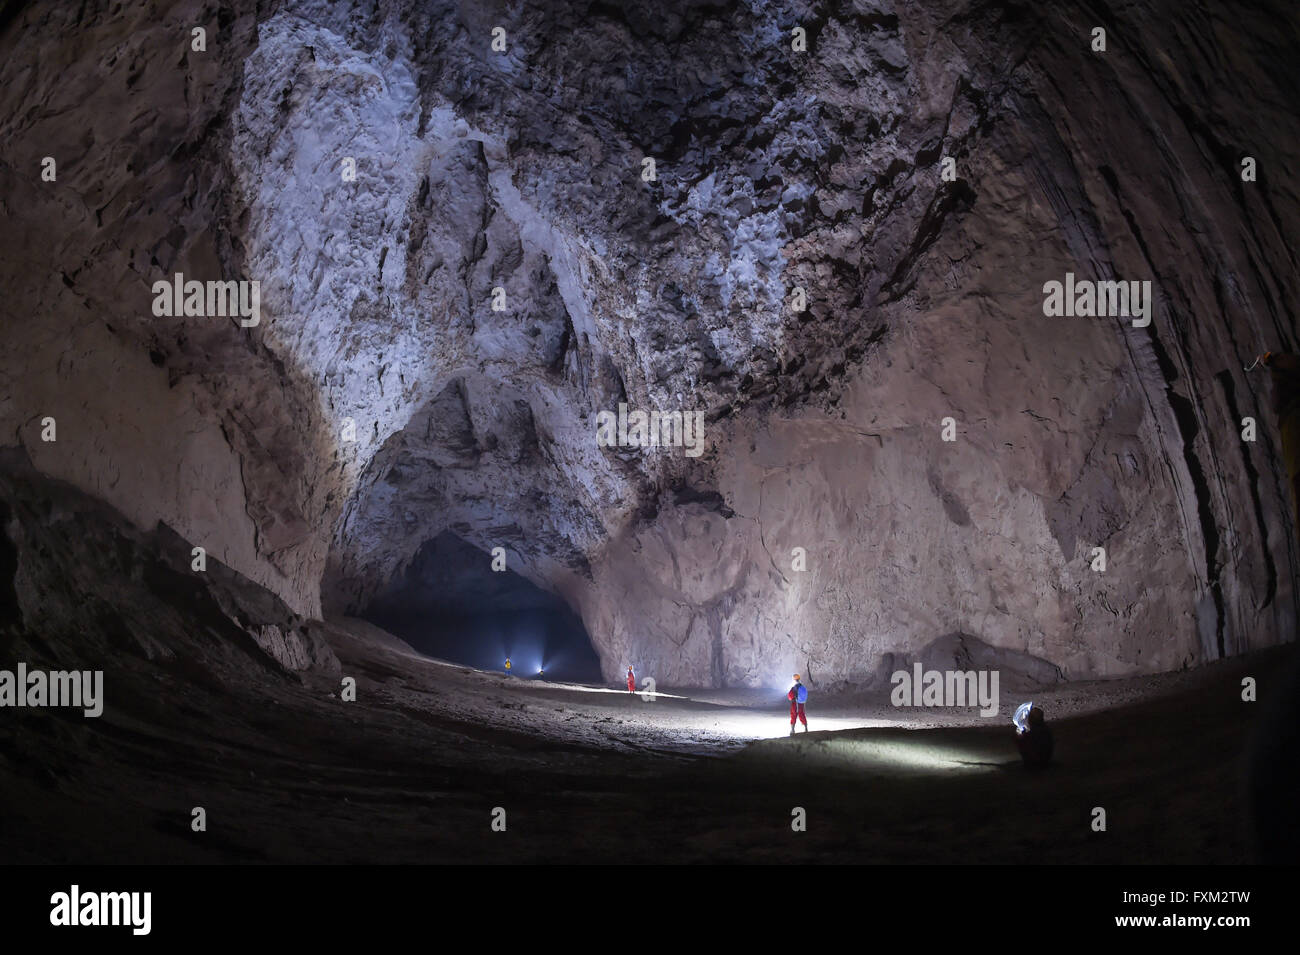 Beijing, Ziyun County of southwest China's Guizhou Province. 14th Apr, 2016. Expedition members work within the Miao Room Chamber, China's largest cave chamber by volume, in Ziyun County of southwest China's Guizhou Province, April 14, 2016. In 2014, National Geographic announced Miao Room Chamber, with a volume of some 19.78 million cubic meters, as the world's largest cave chamber. © Ou Dongqu/Xinhua/Alamy Live News Stock Photo